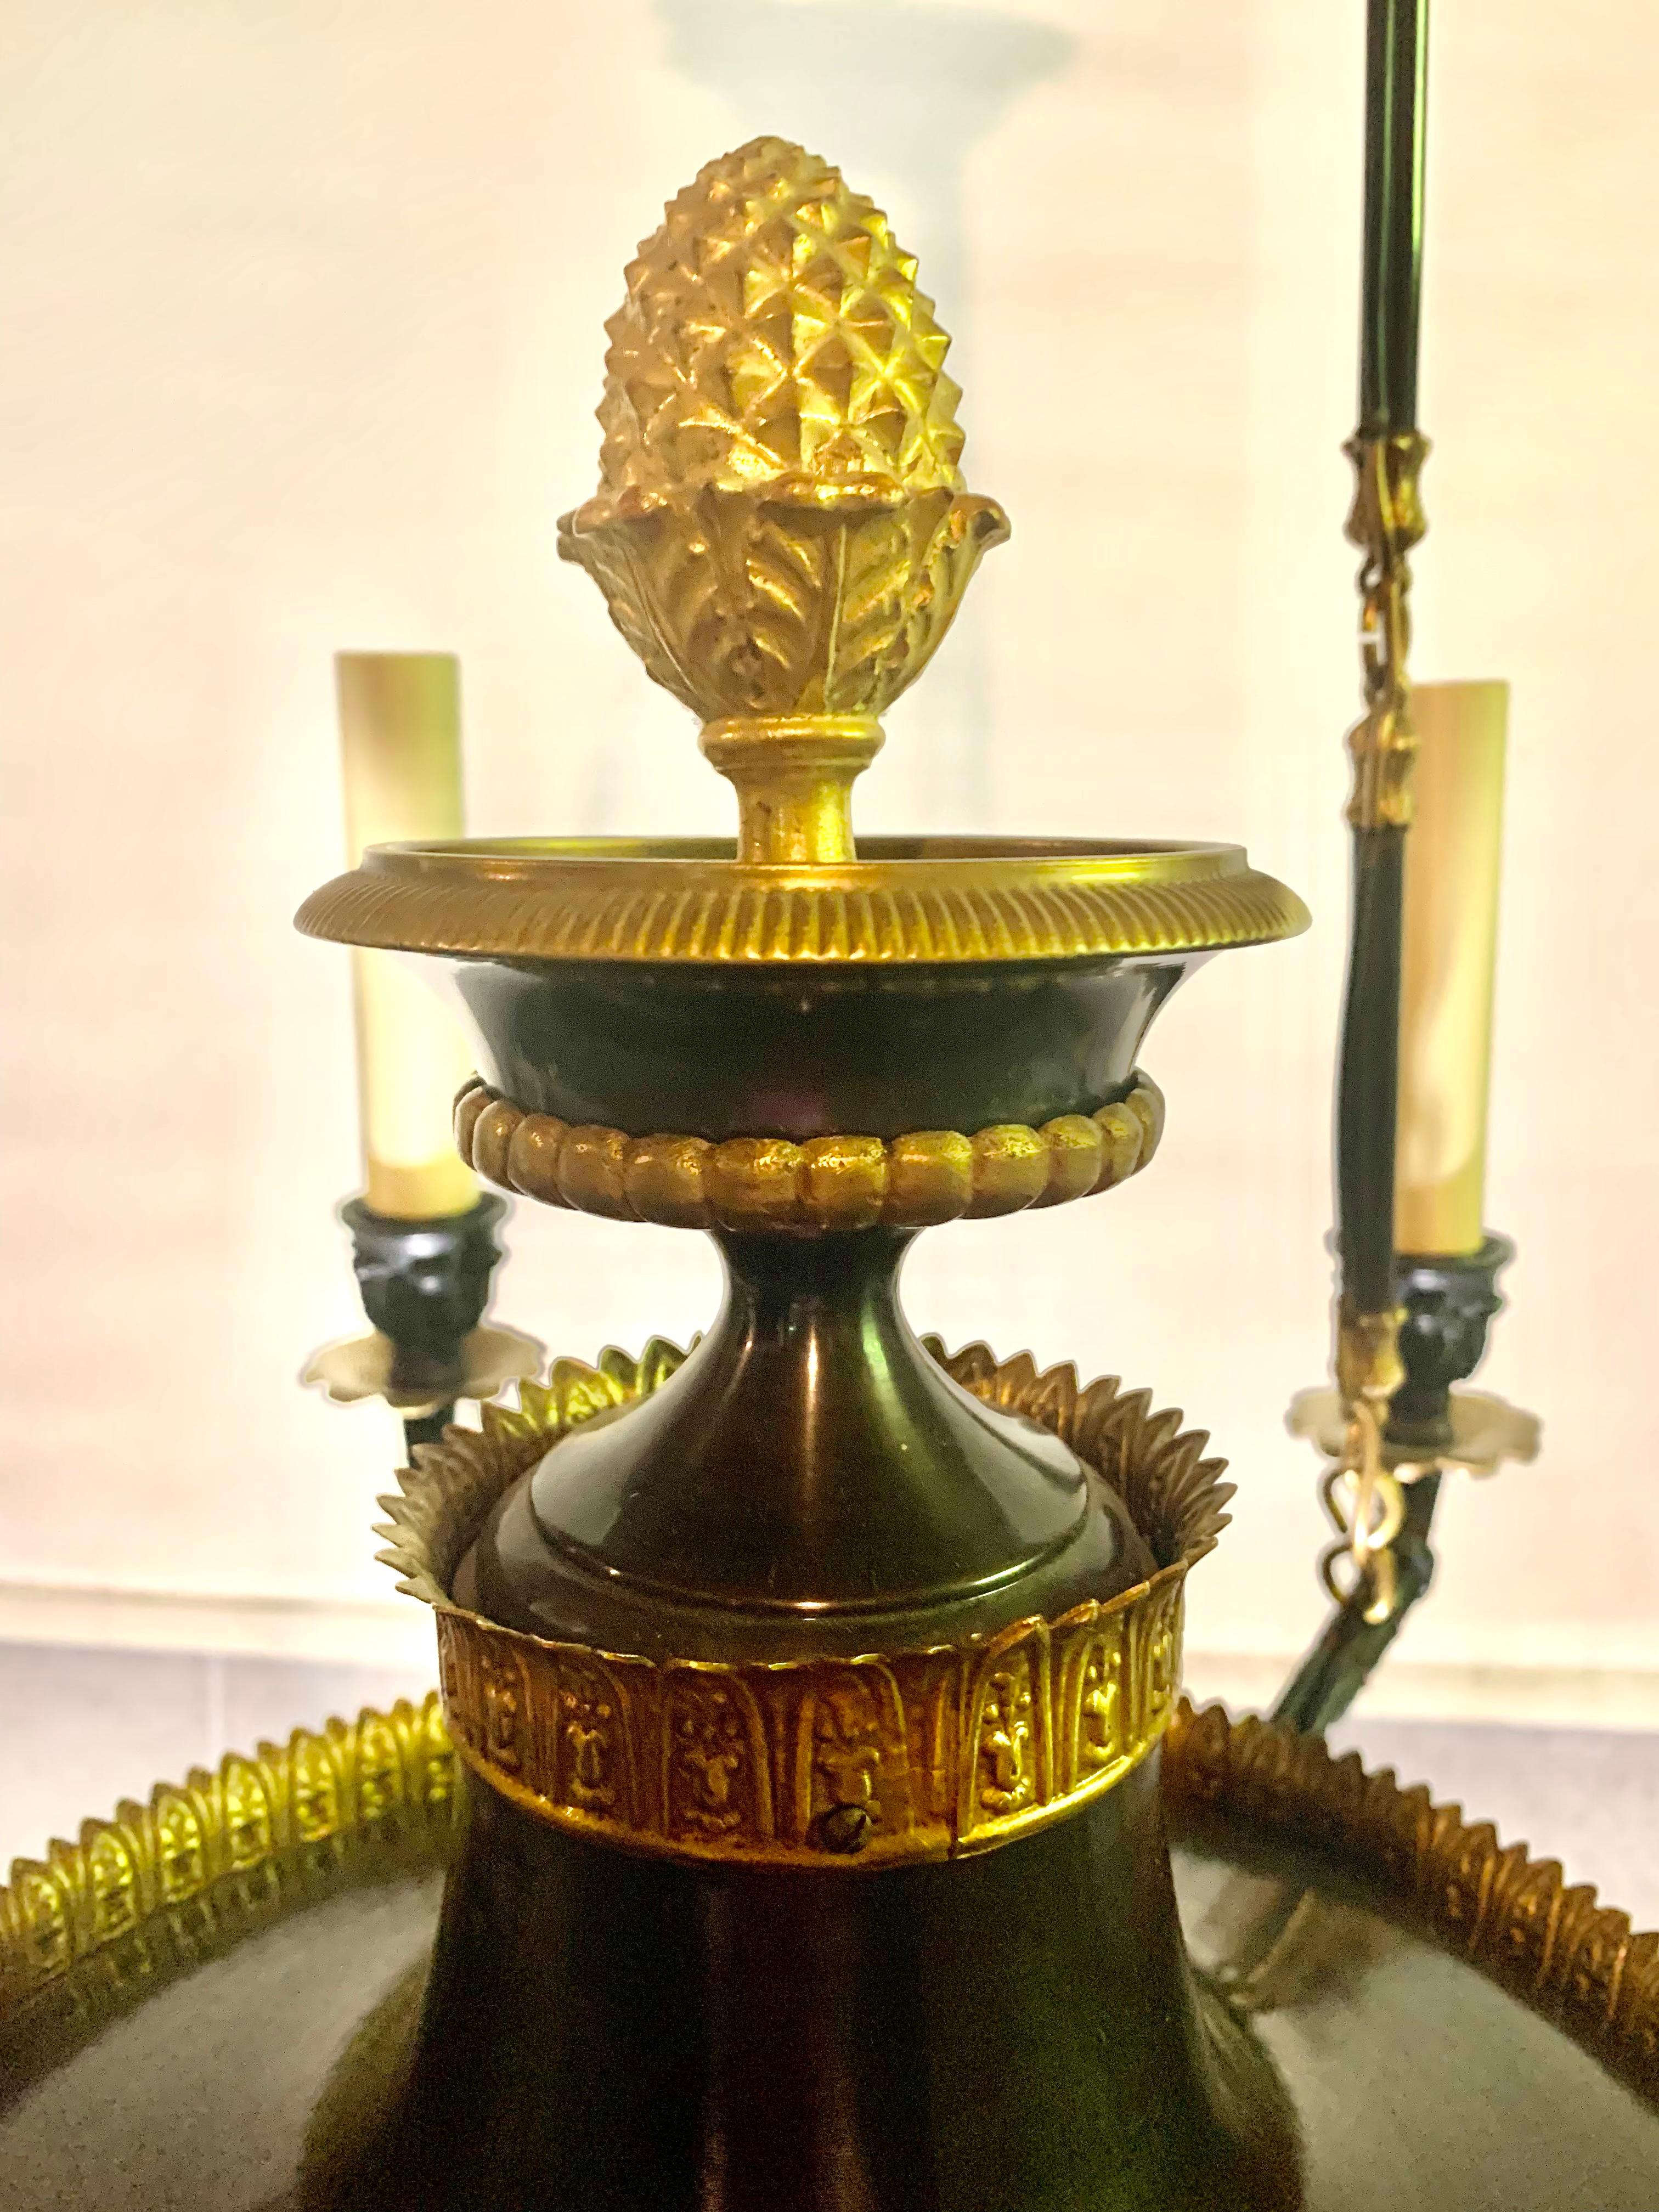 Classical French Empire gilt bronze, patinated metal and gilt wood six light chandelier.
19th Century
Well proportioned central gilt and patinated bronze Empire tazza with a large giltwood finial atop a circular gilt decorated patinated metal vessel